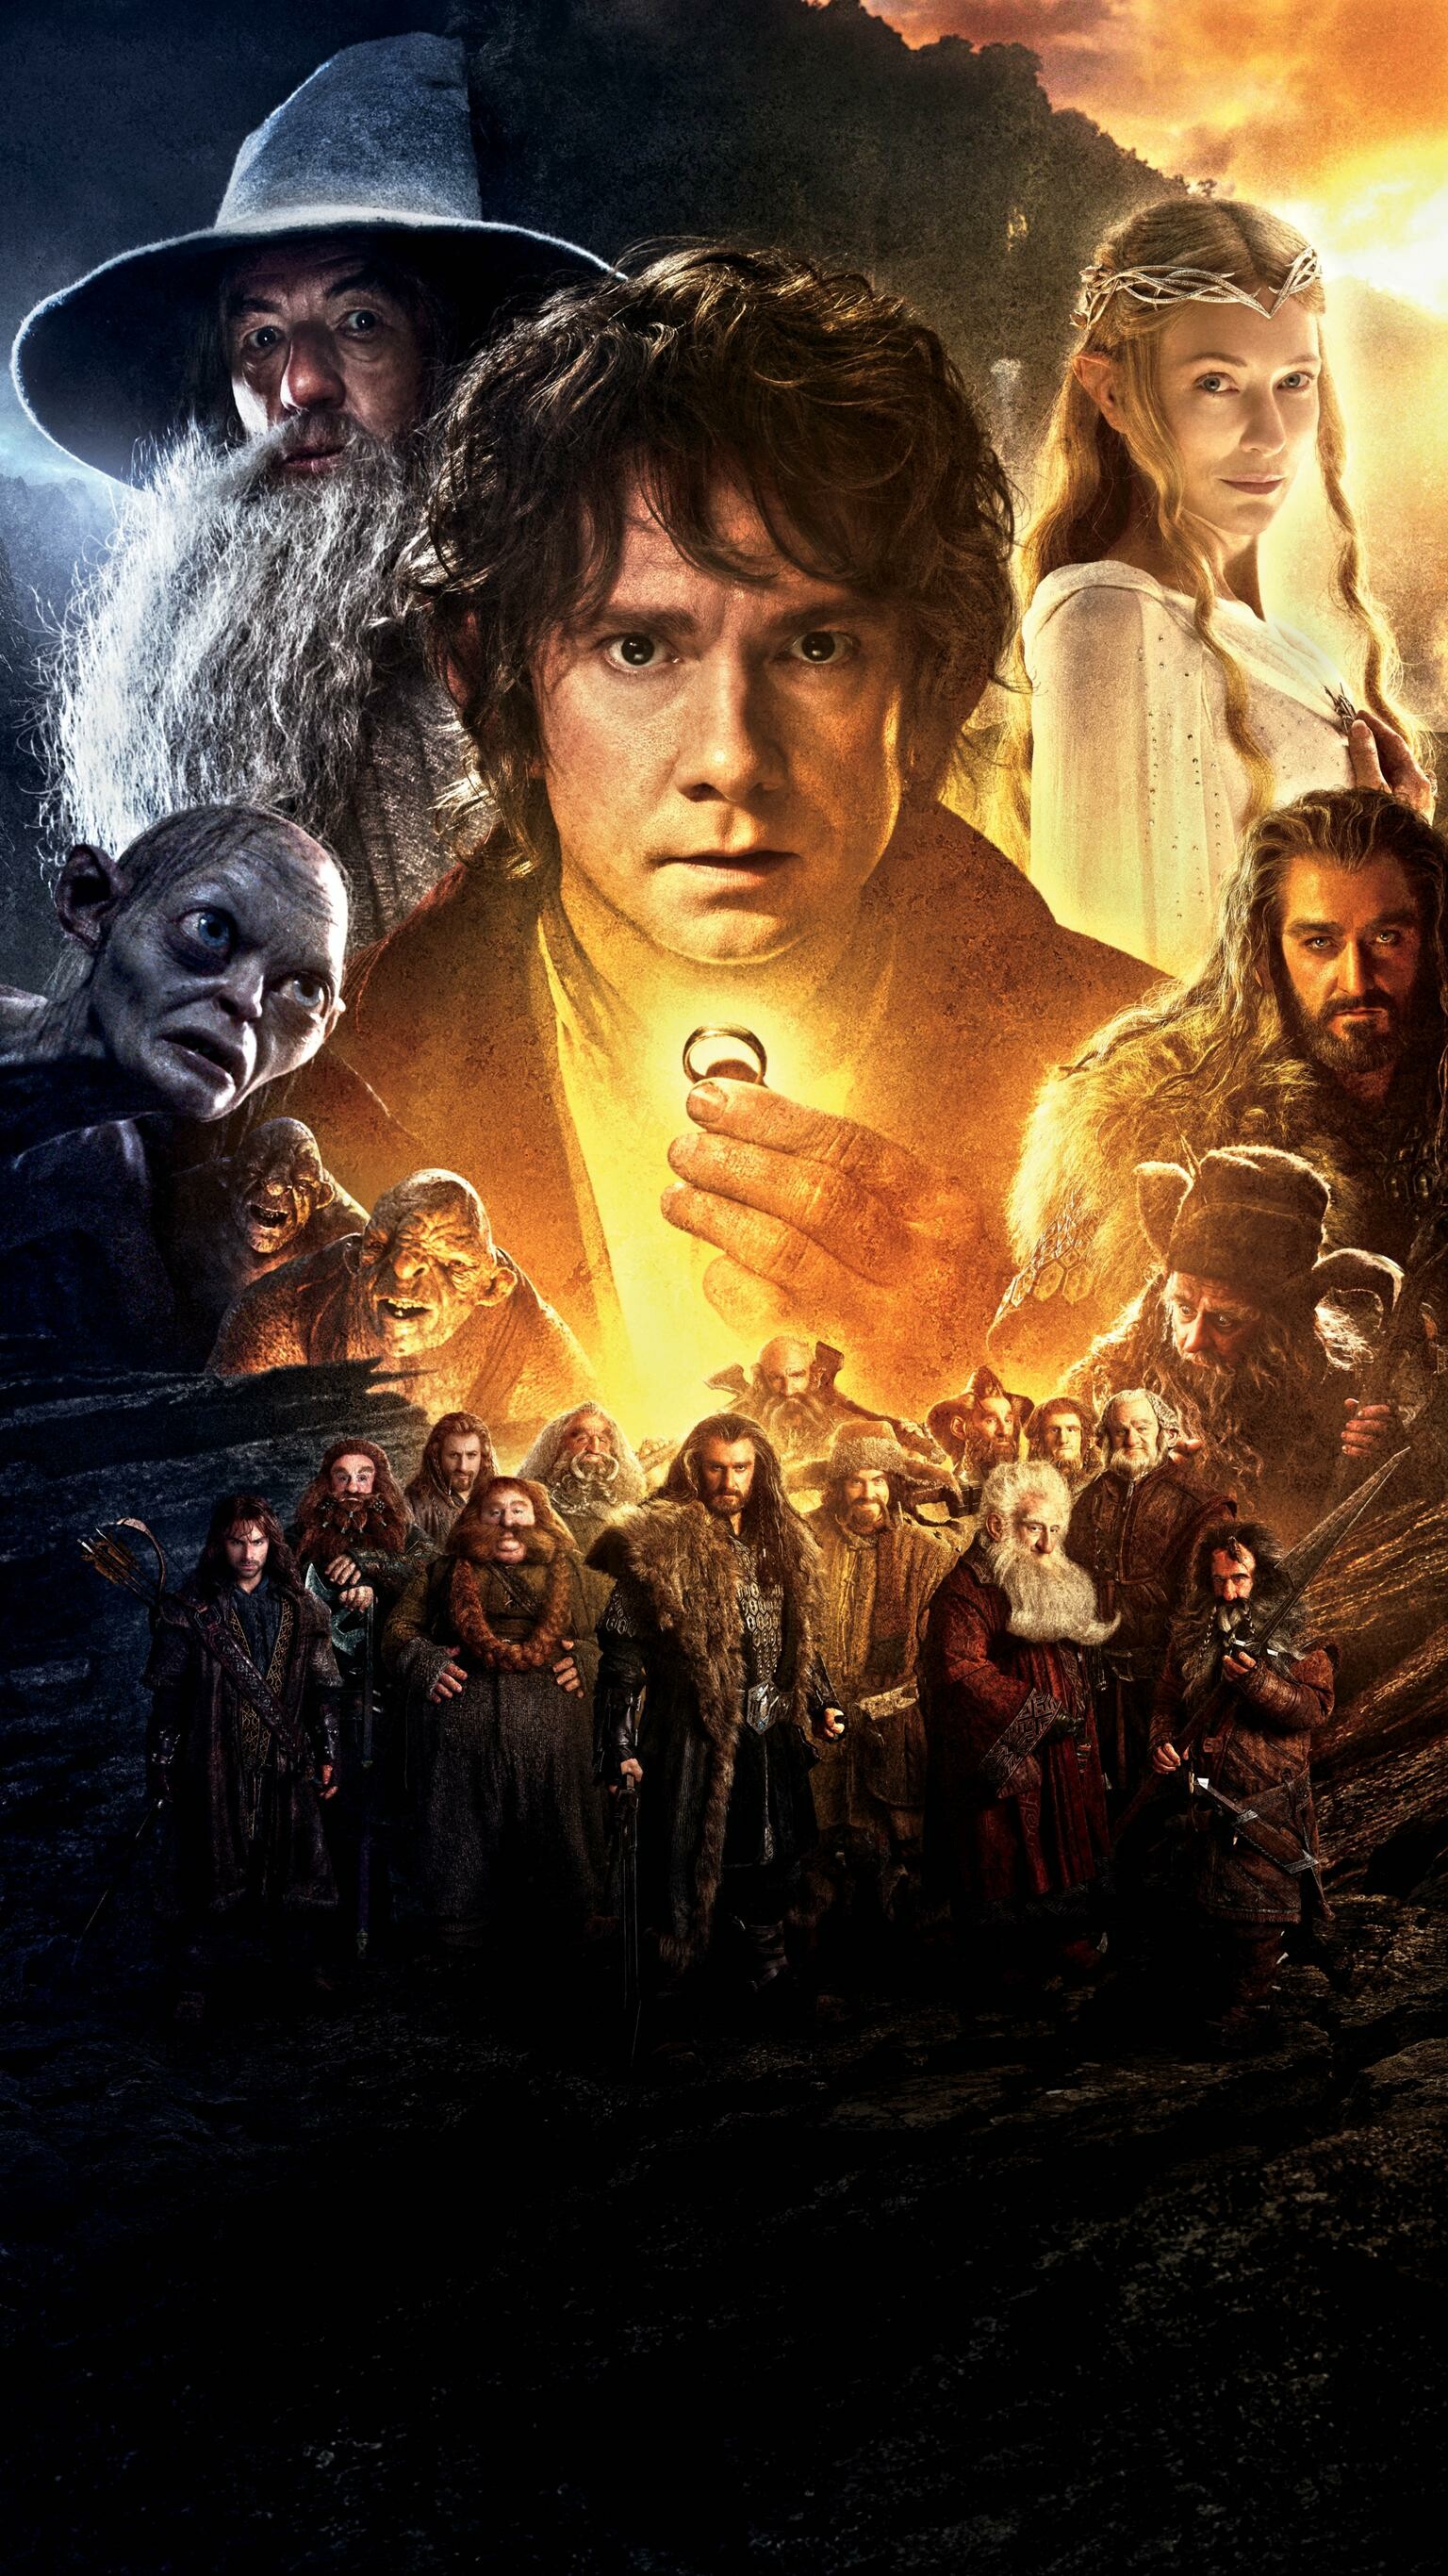 The Hobbit: A series of three epic high fantasy adventure films directed by Peter Jackson. 1540x2740 HD Wallpaper.